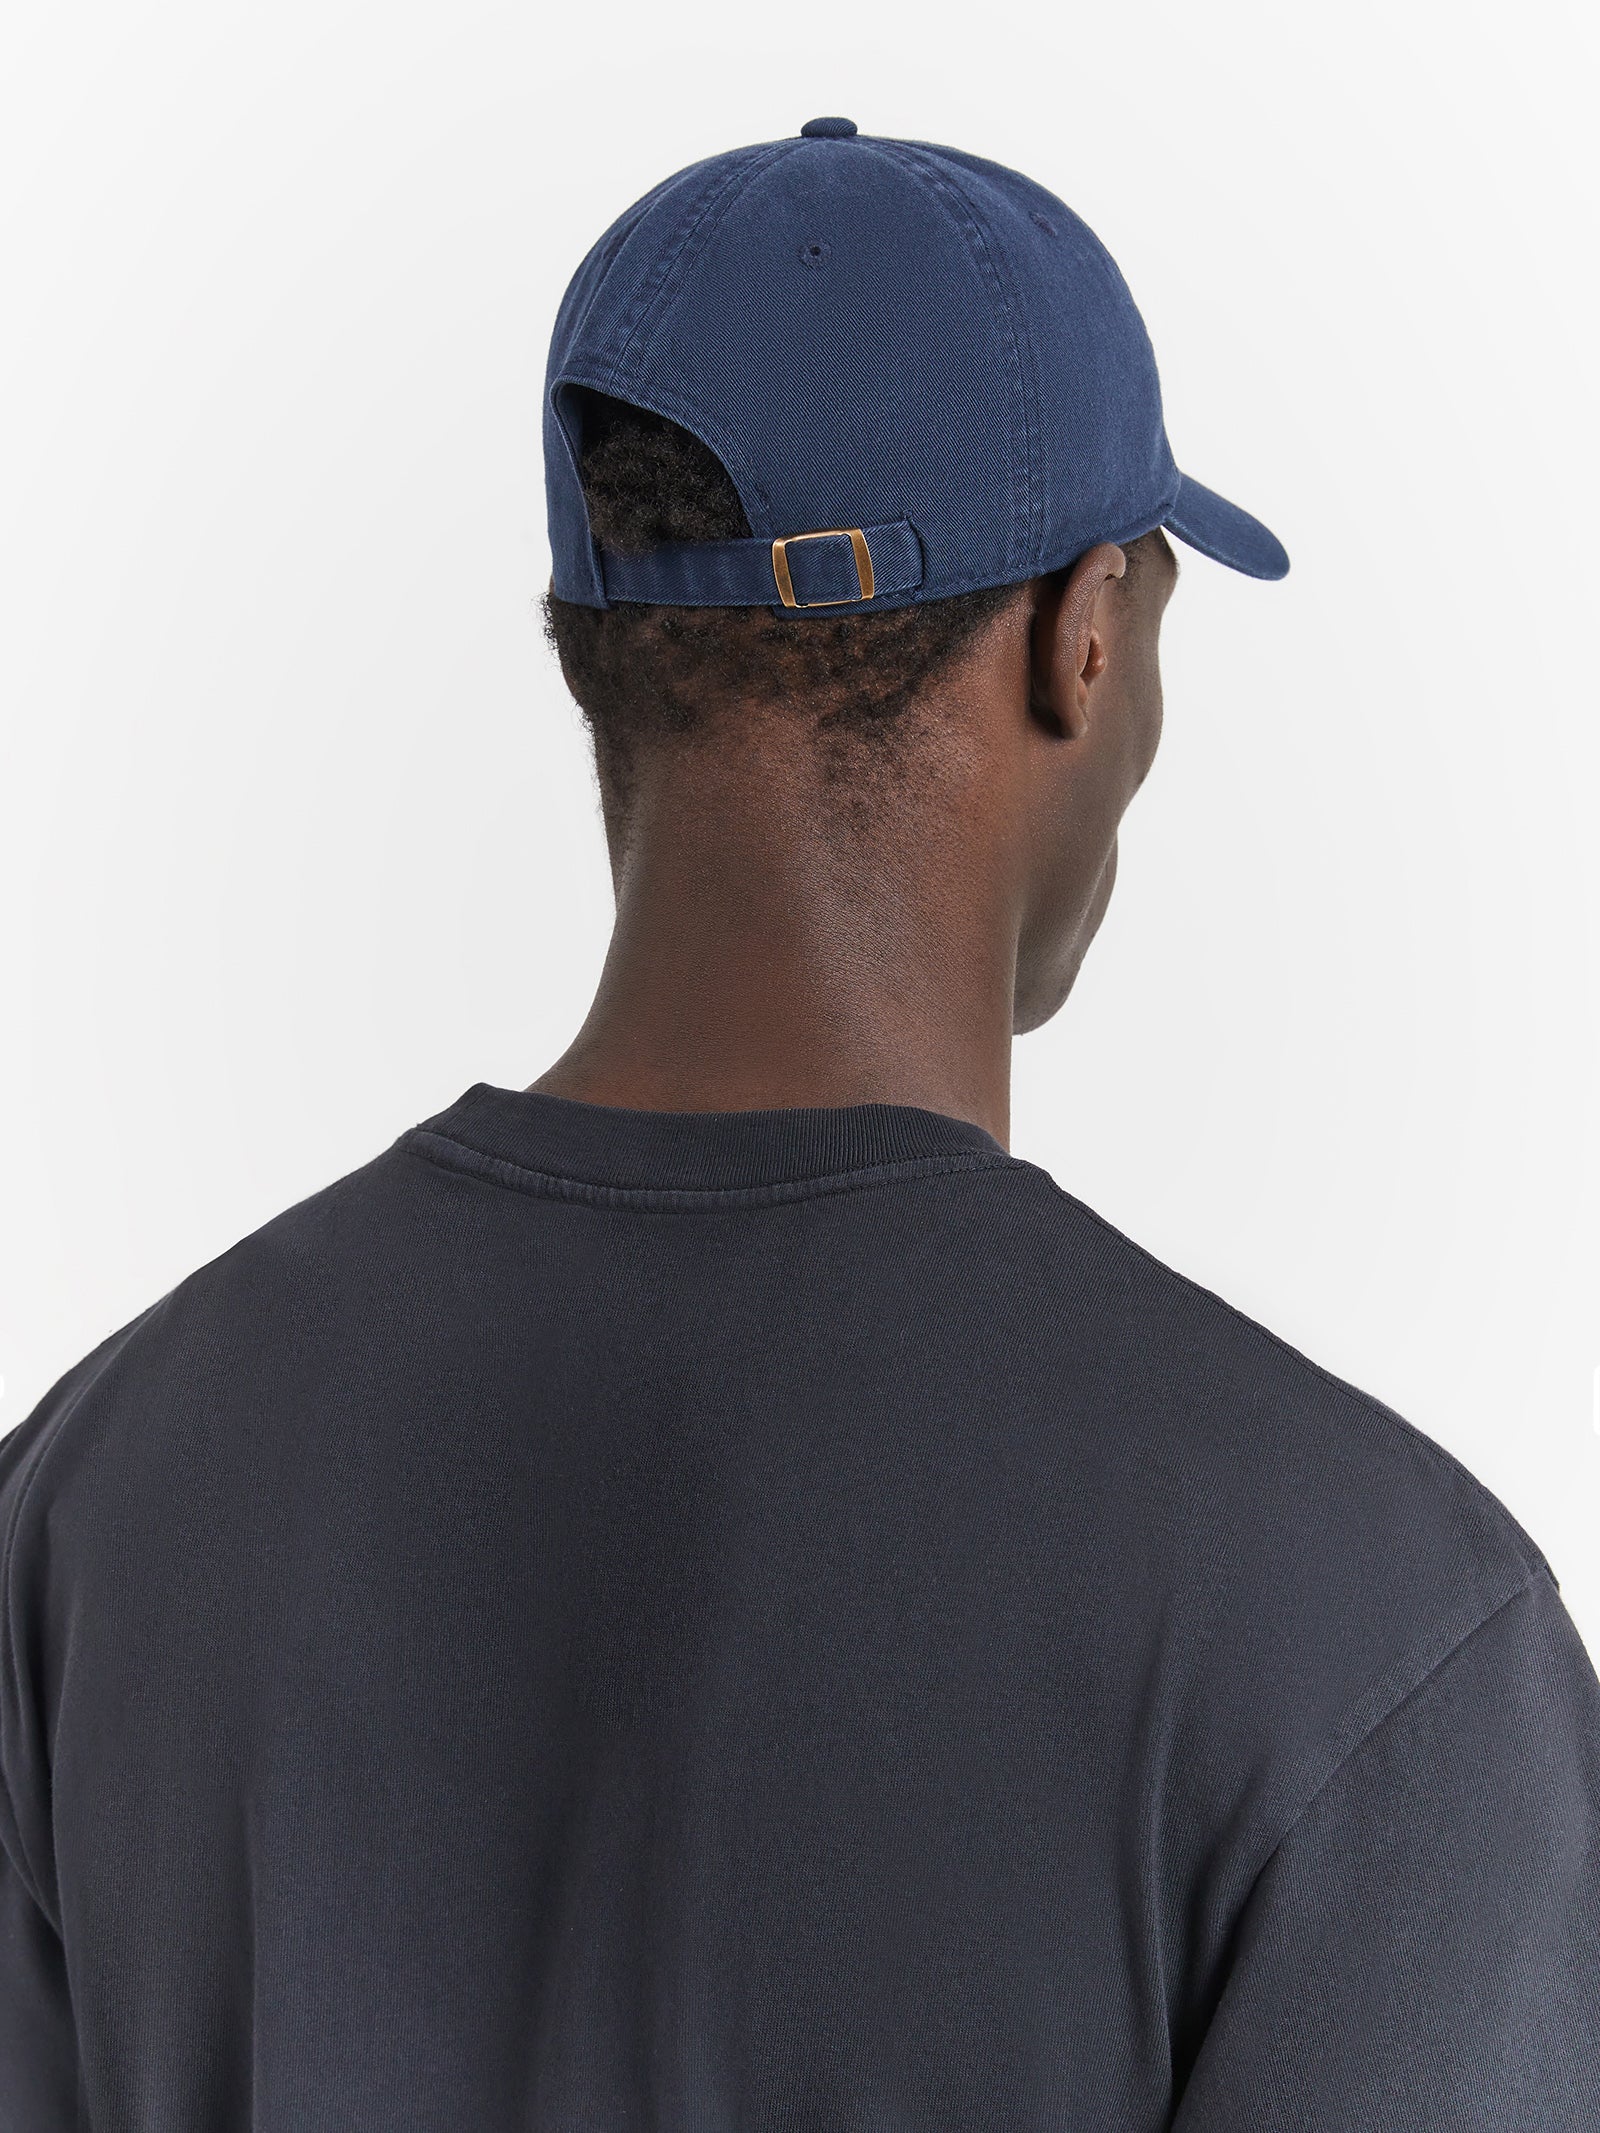 Yosemite Patch Ball Park Cap in Navy - Glue Store